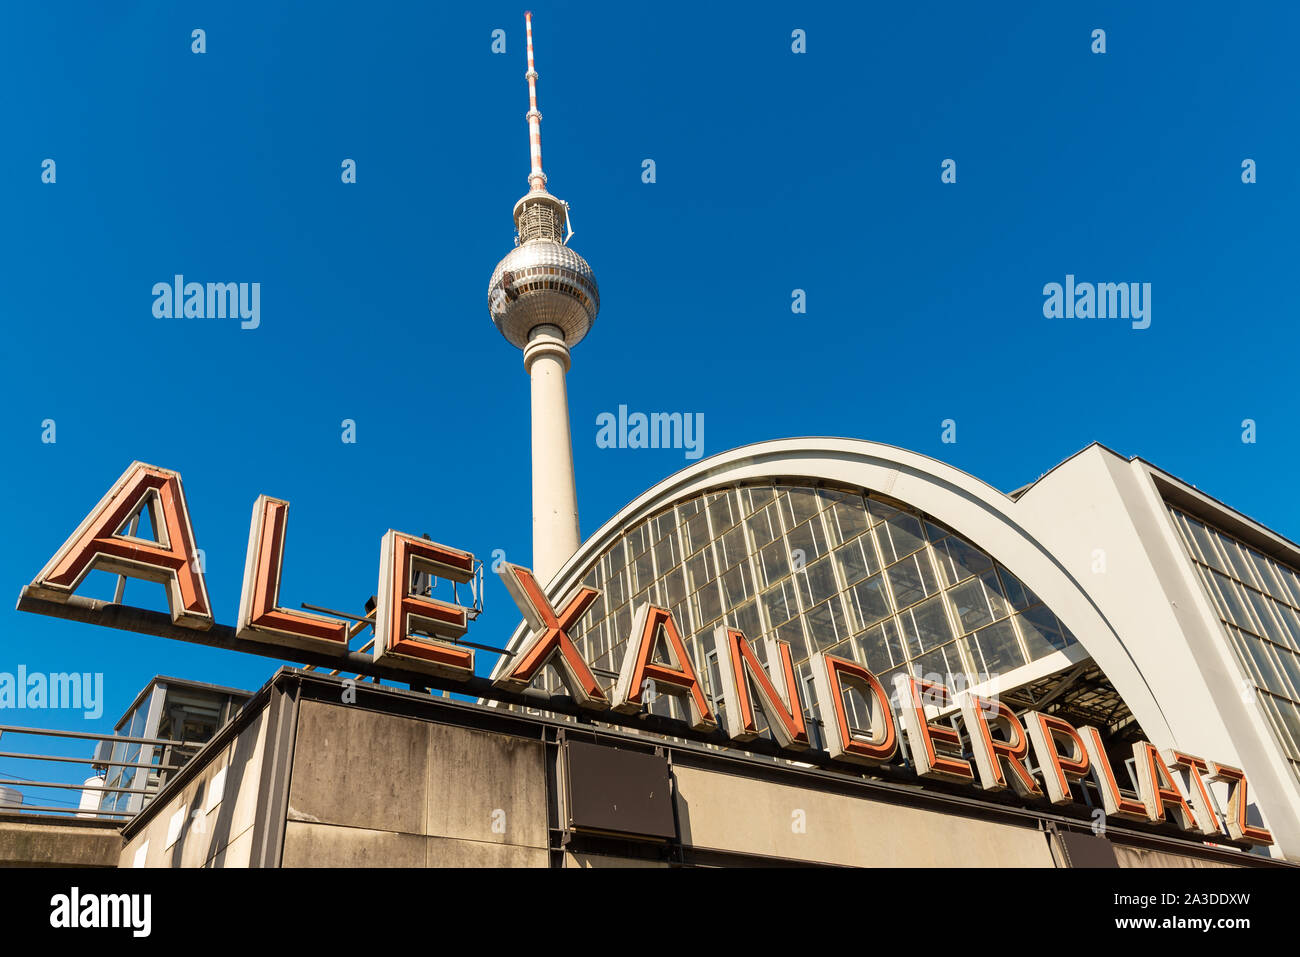 Alexanderplatz Station and the famous TV Tower, Berlin, Germany Stock Photo